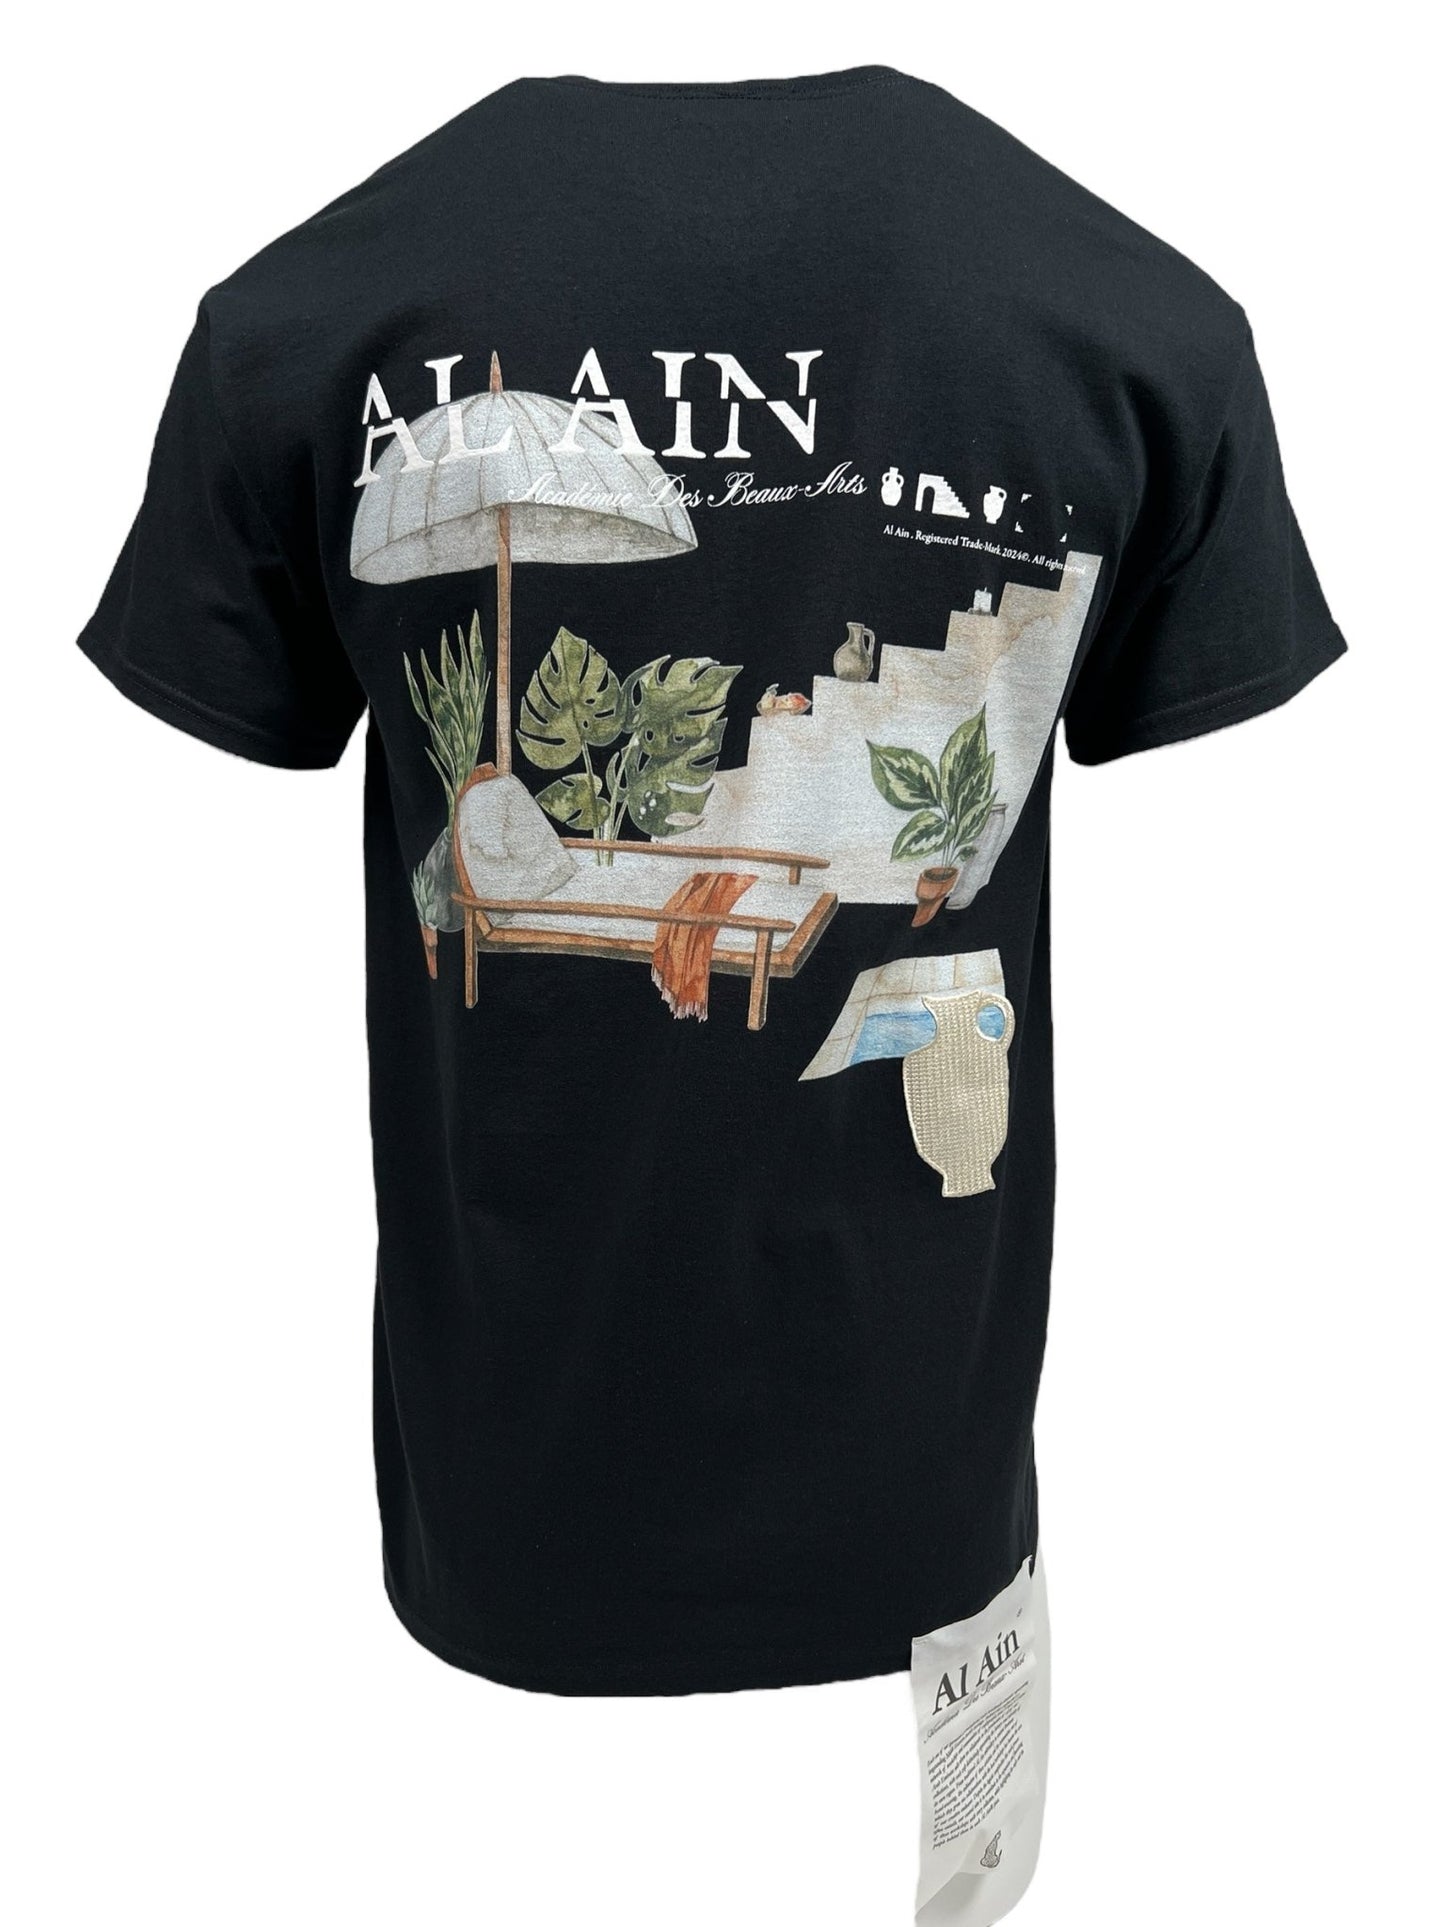 A black graphic T-shirt with a printed design on the back depicting a lounge chair, umbrella, and tropical plants. The text "AL AIN" is visible at the top. Made from 100% cotton, it features an attached tag at the bottom right. This product is the AL AIN AMHX S124 CHILL NOIR from AL AIN.